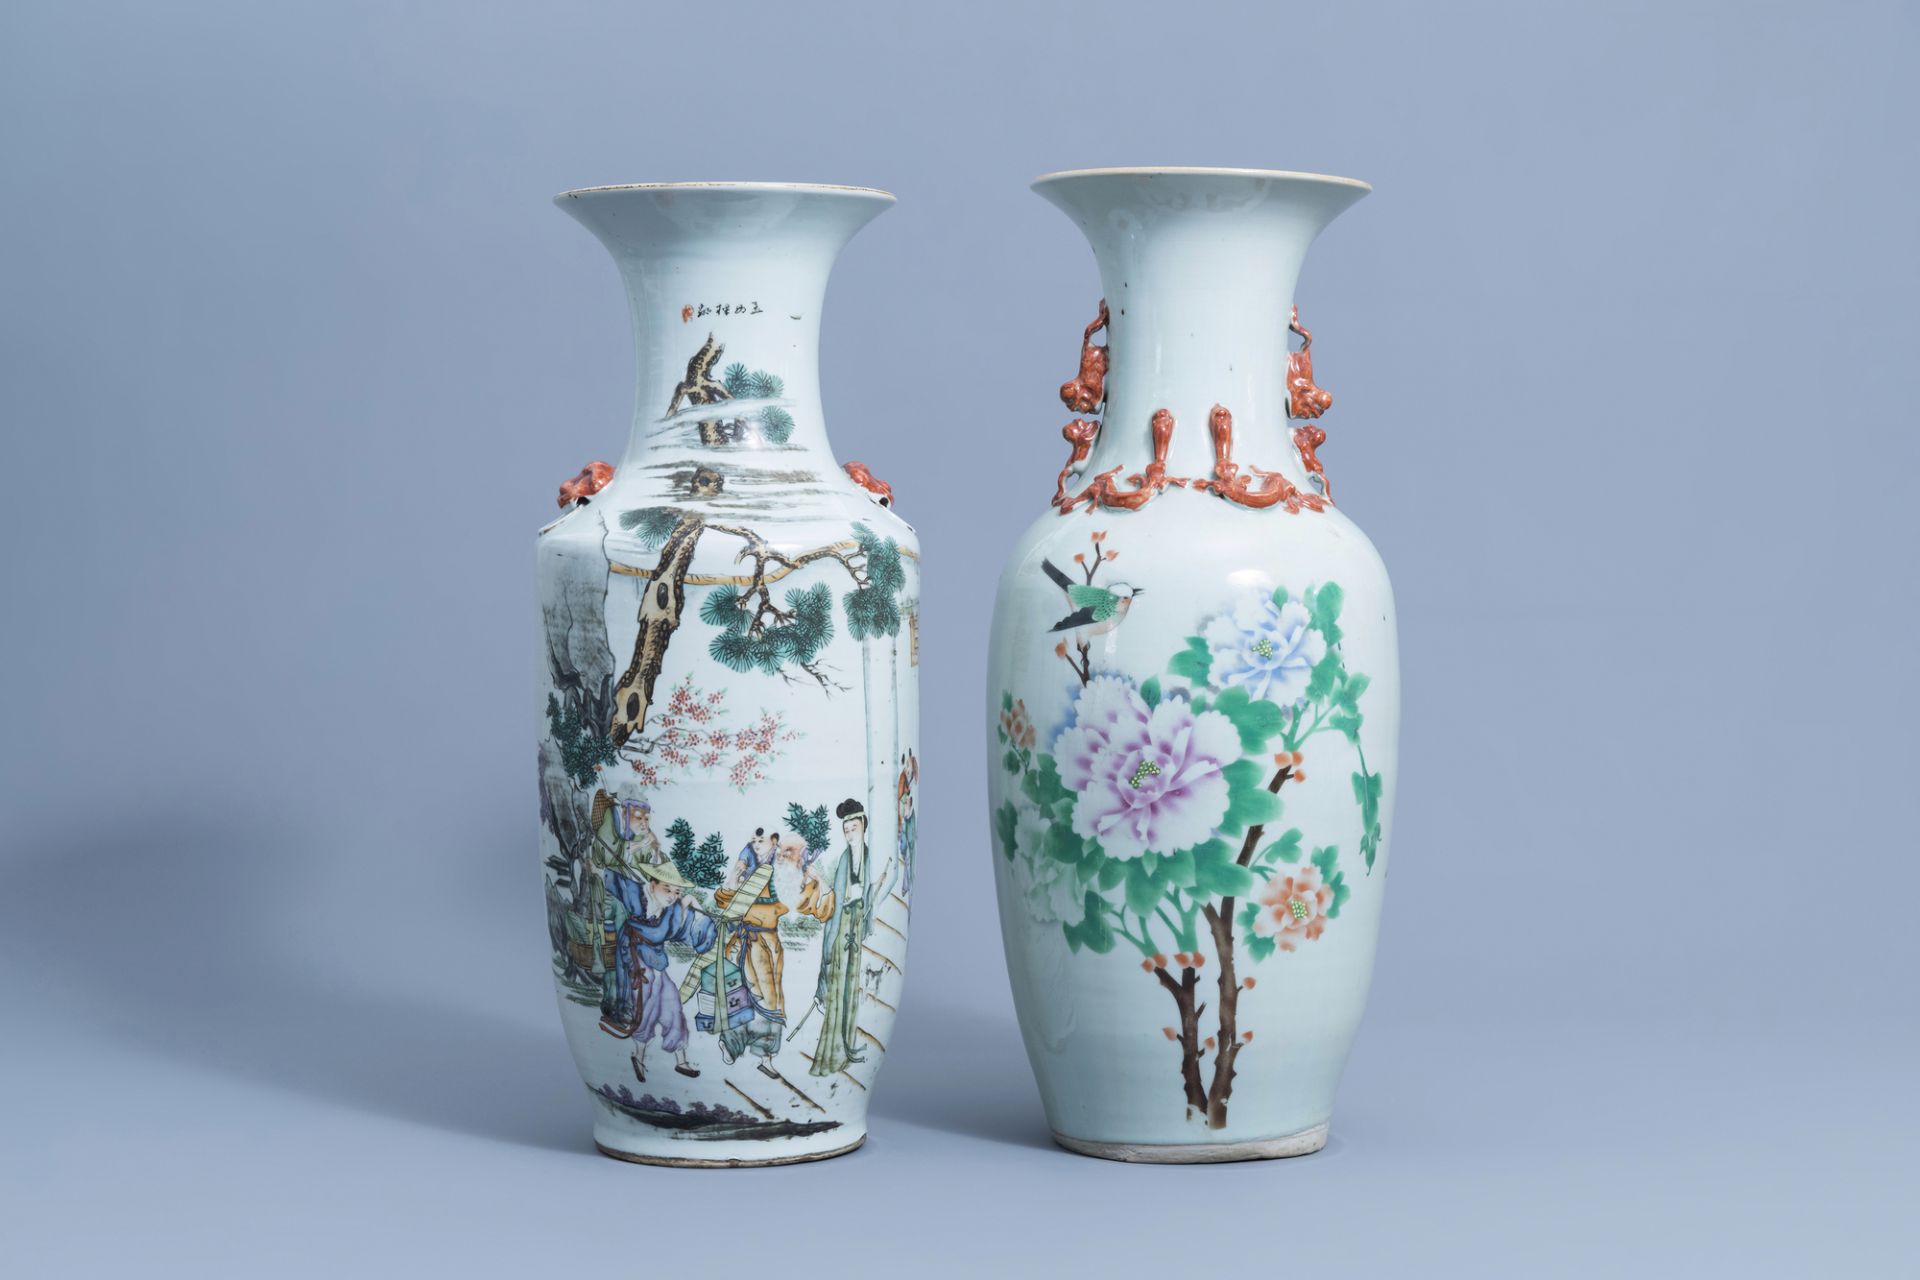 Two Chinese famille rose vases with figurative design & a bird among blossoms, 19th/20th C.